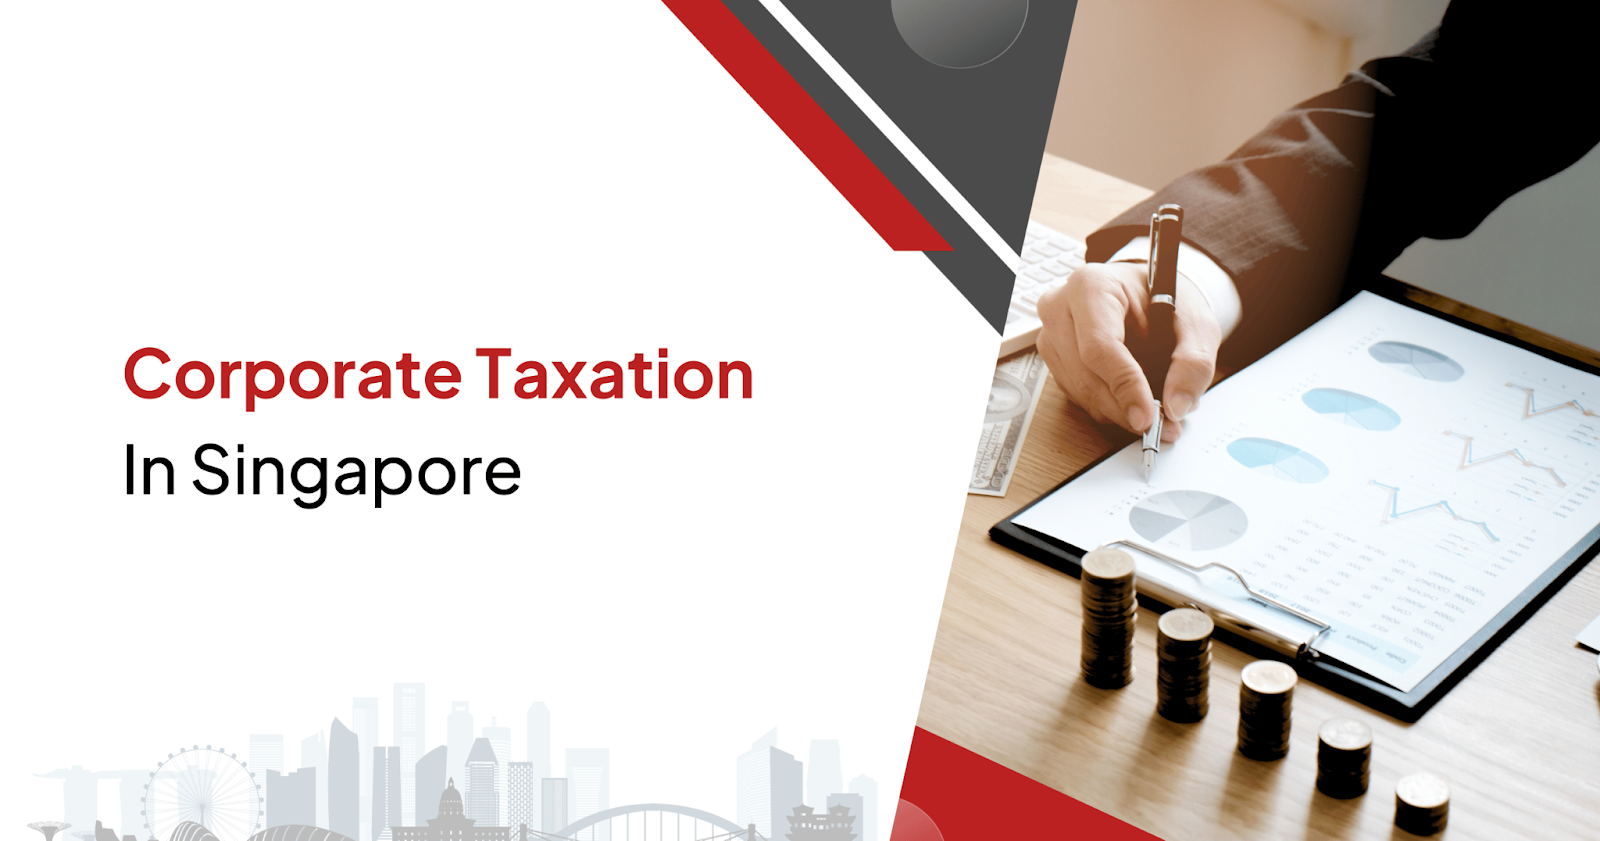 Corporate Taxation in Singapore